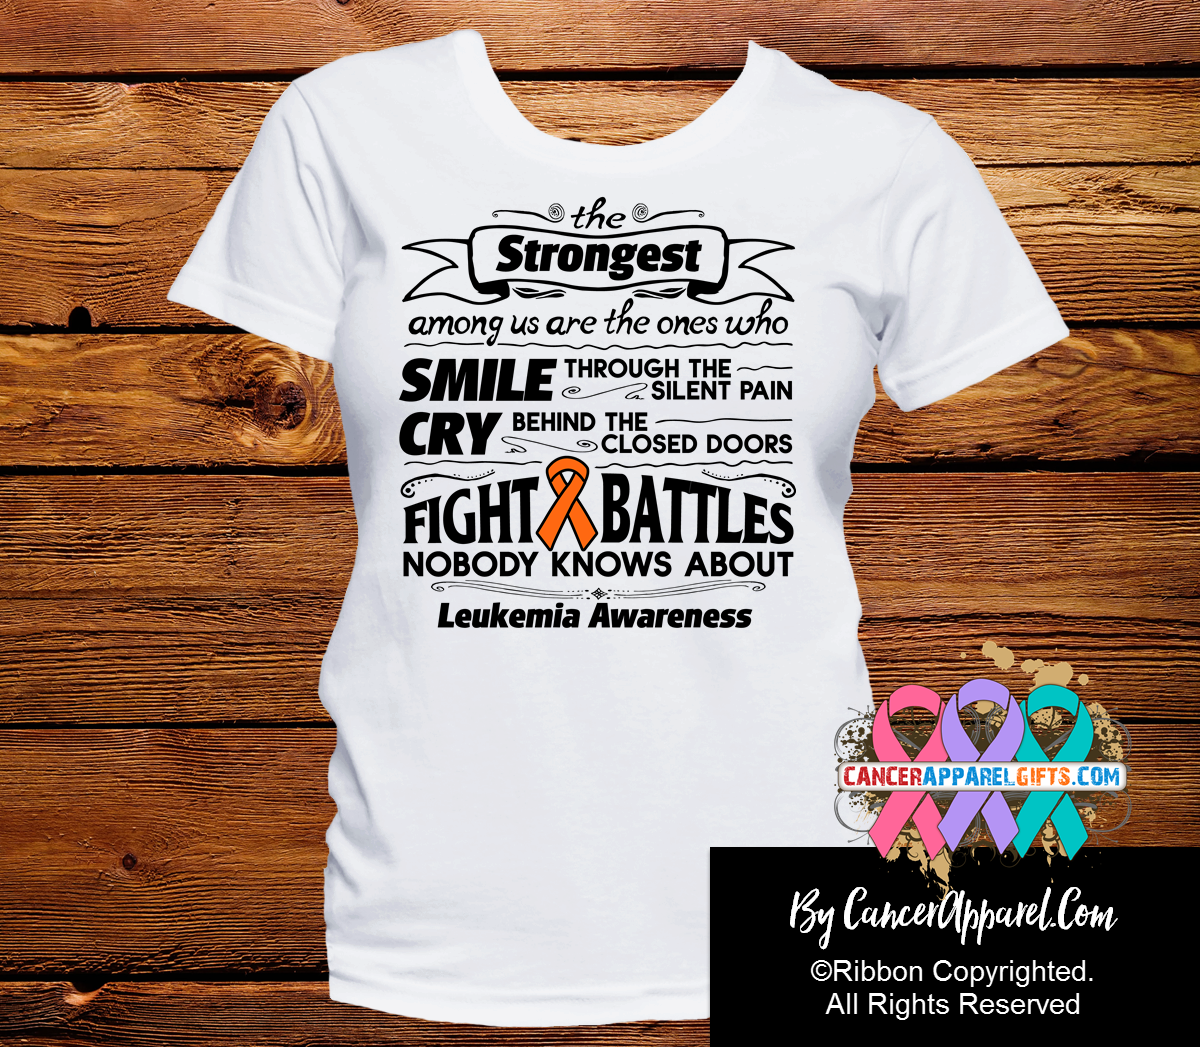 Leukemia The Strongest Among Us Shirts - Cancer Apparel and Gifts